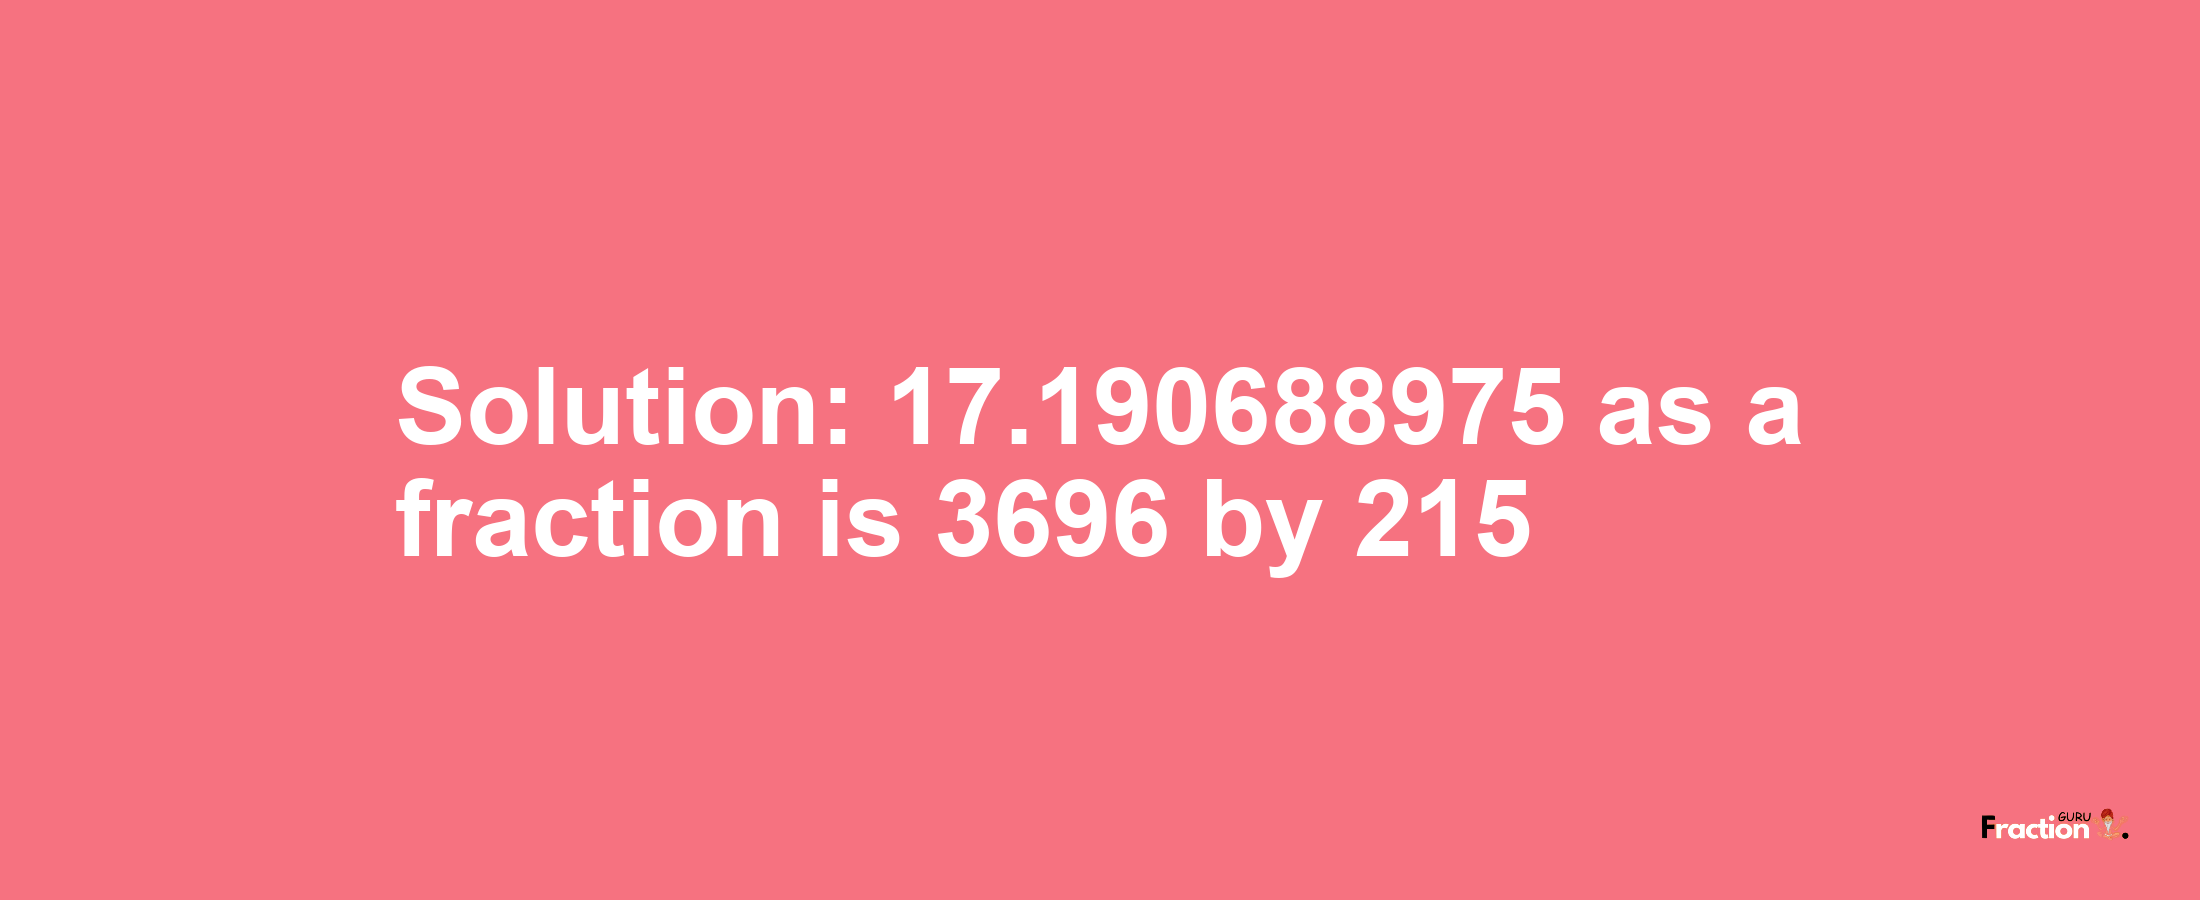 Solution:17.190688975 as a fraction is 3696/215